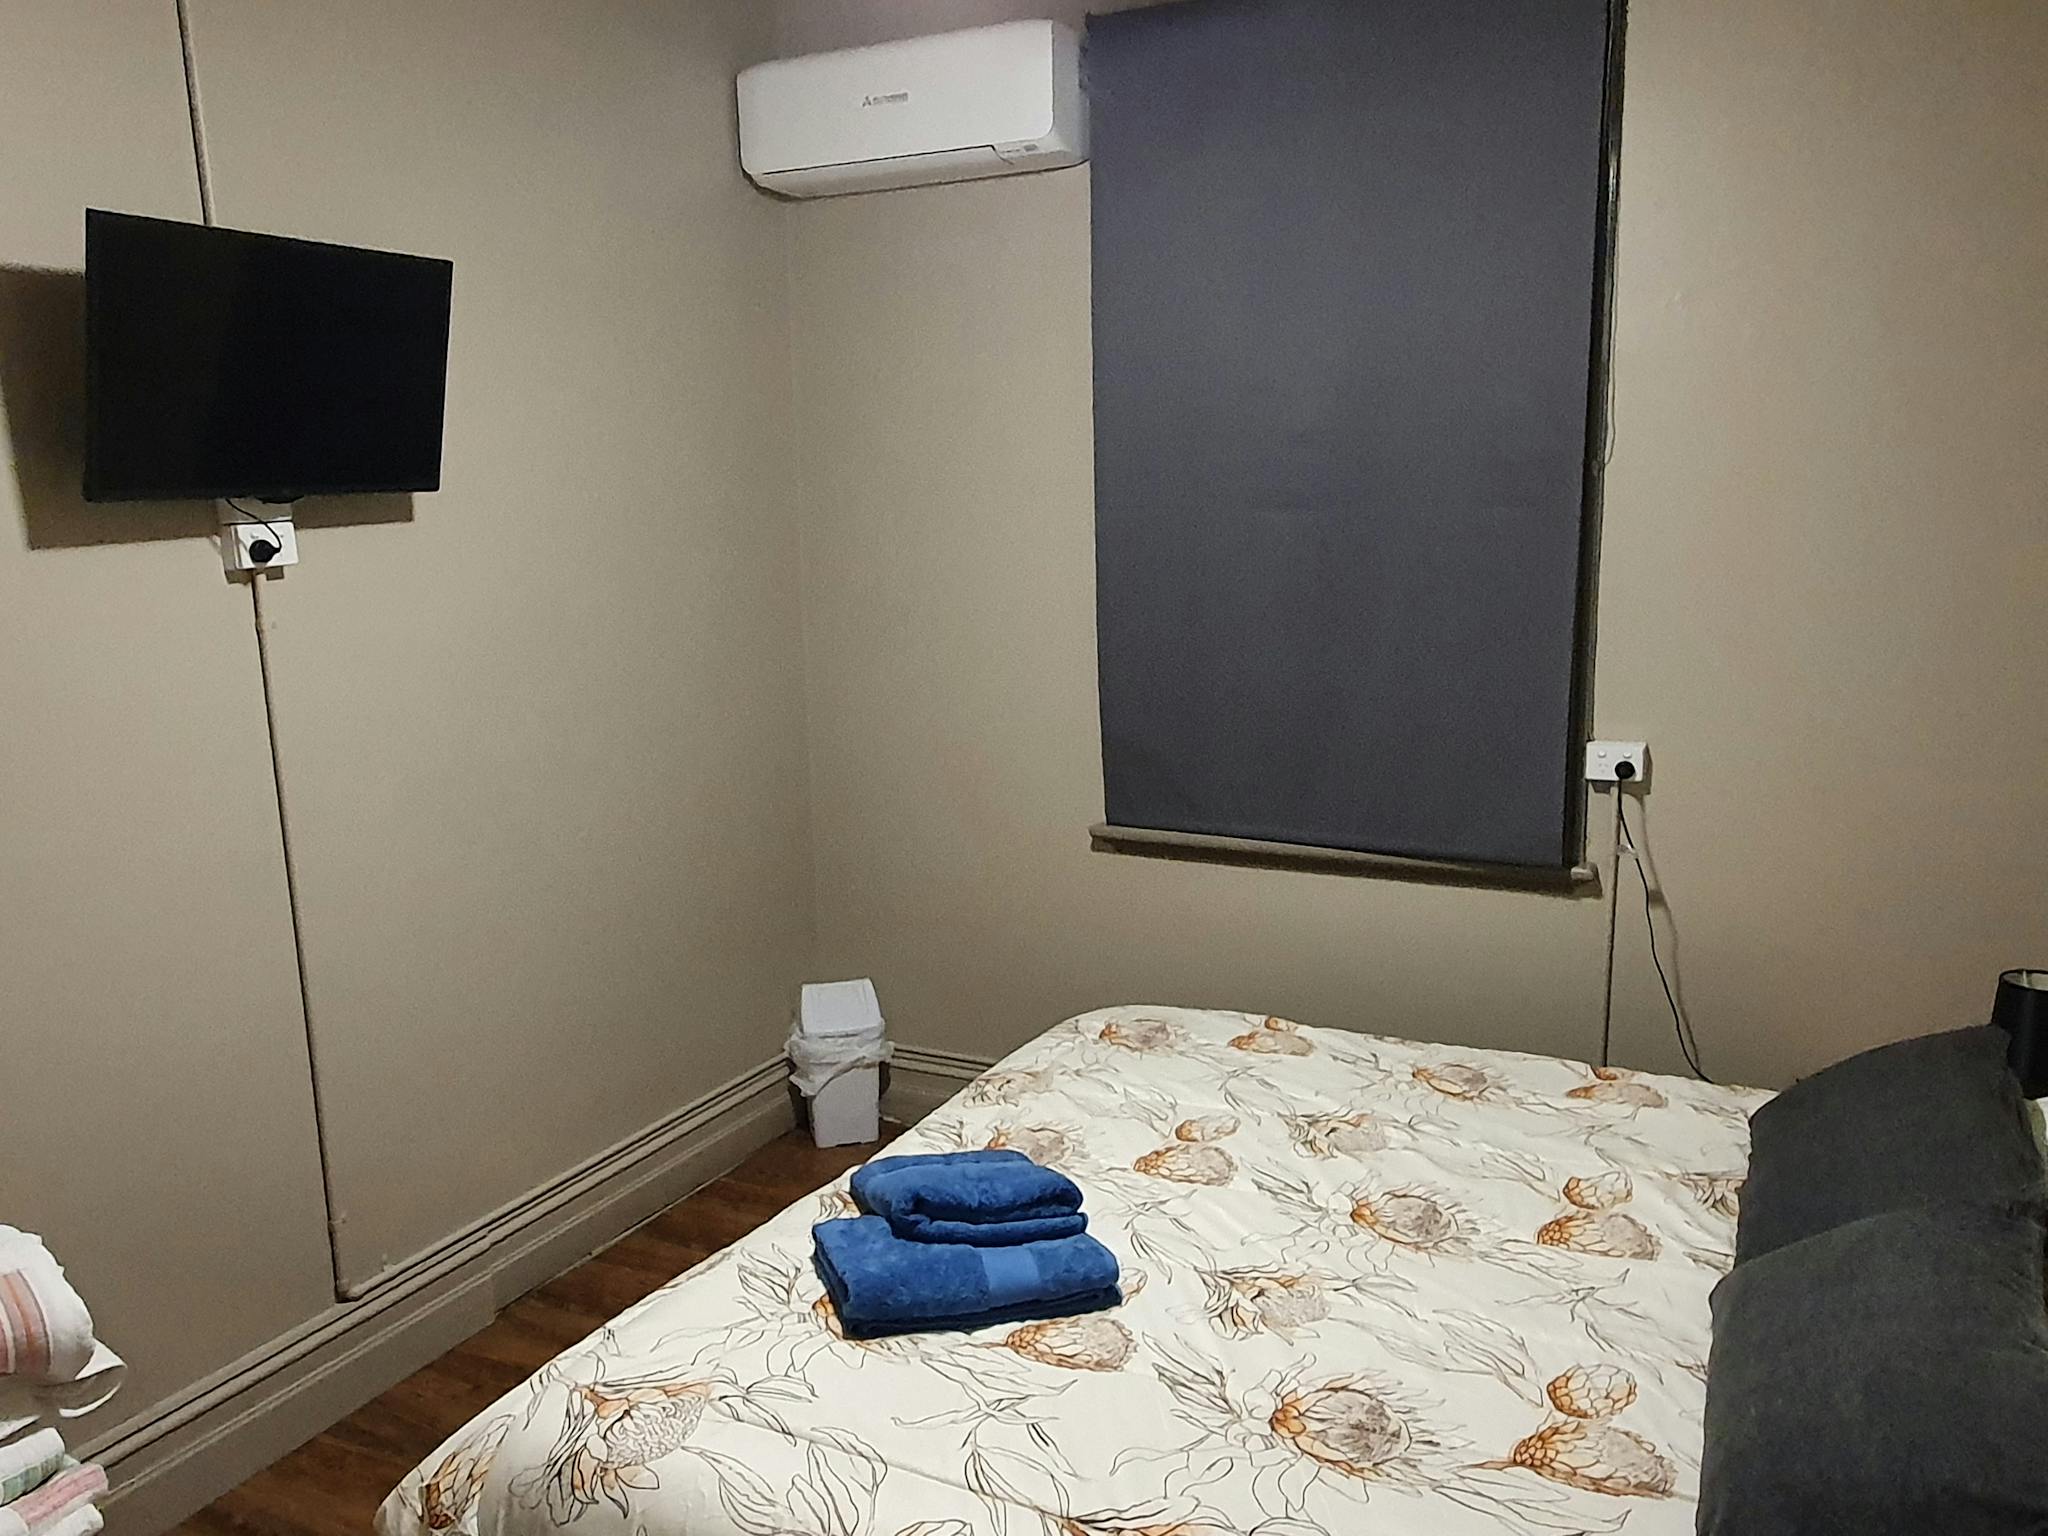 Accommodation room with double bed